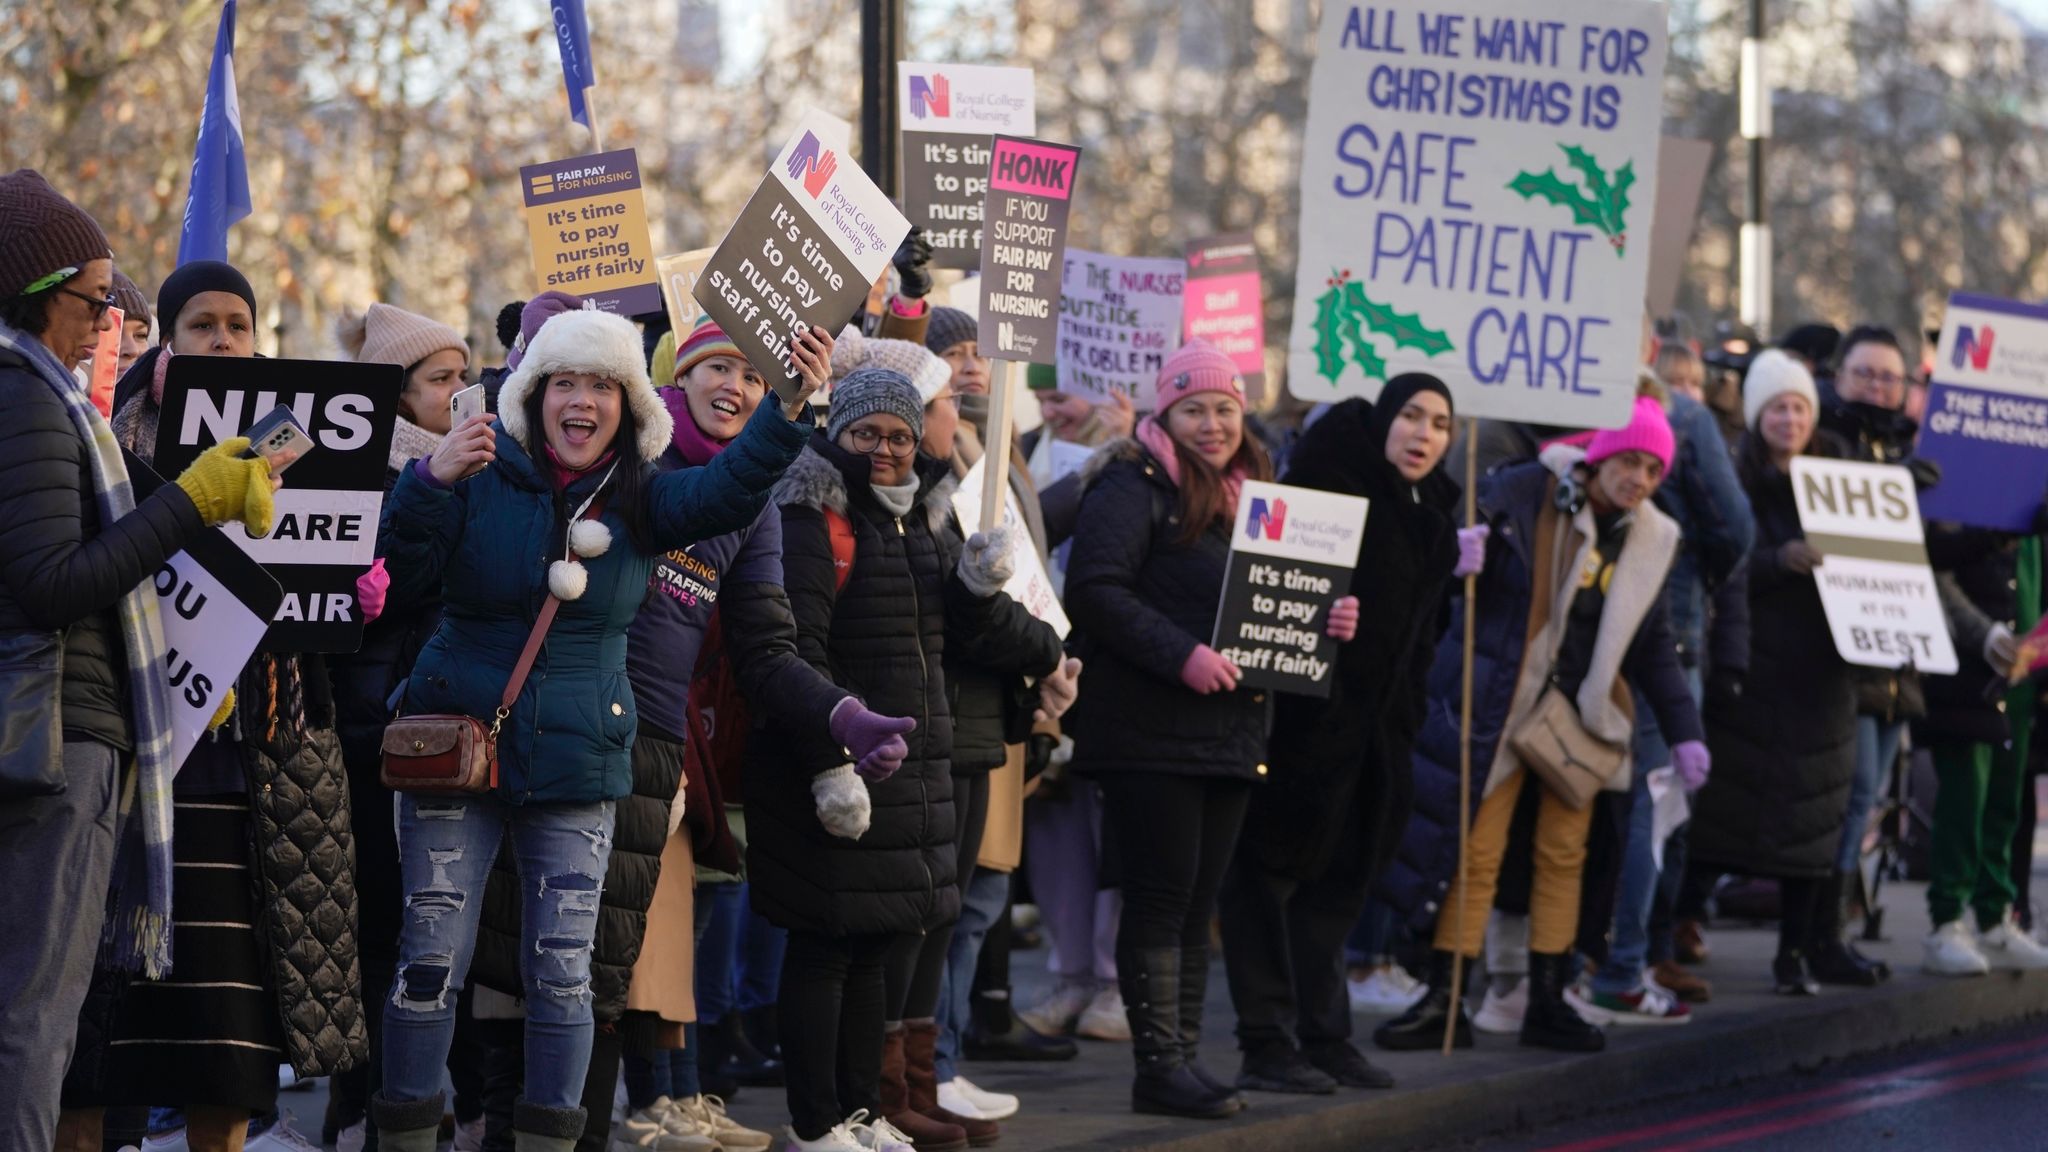 Nurses say they are open to calling off strikes if government discusses